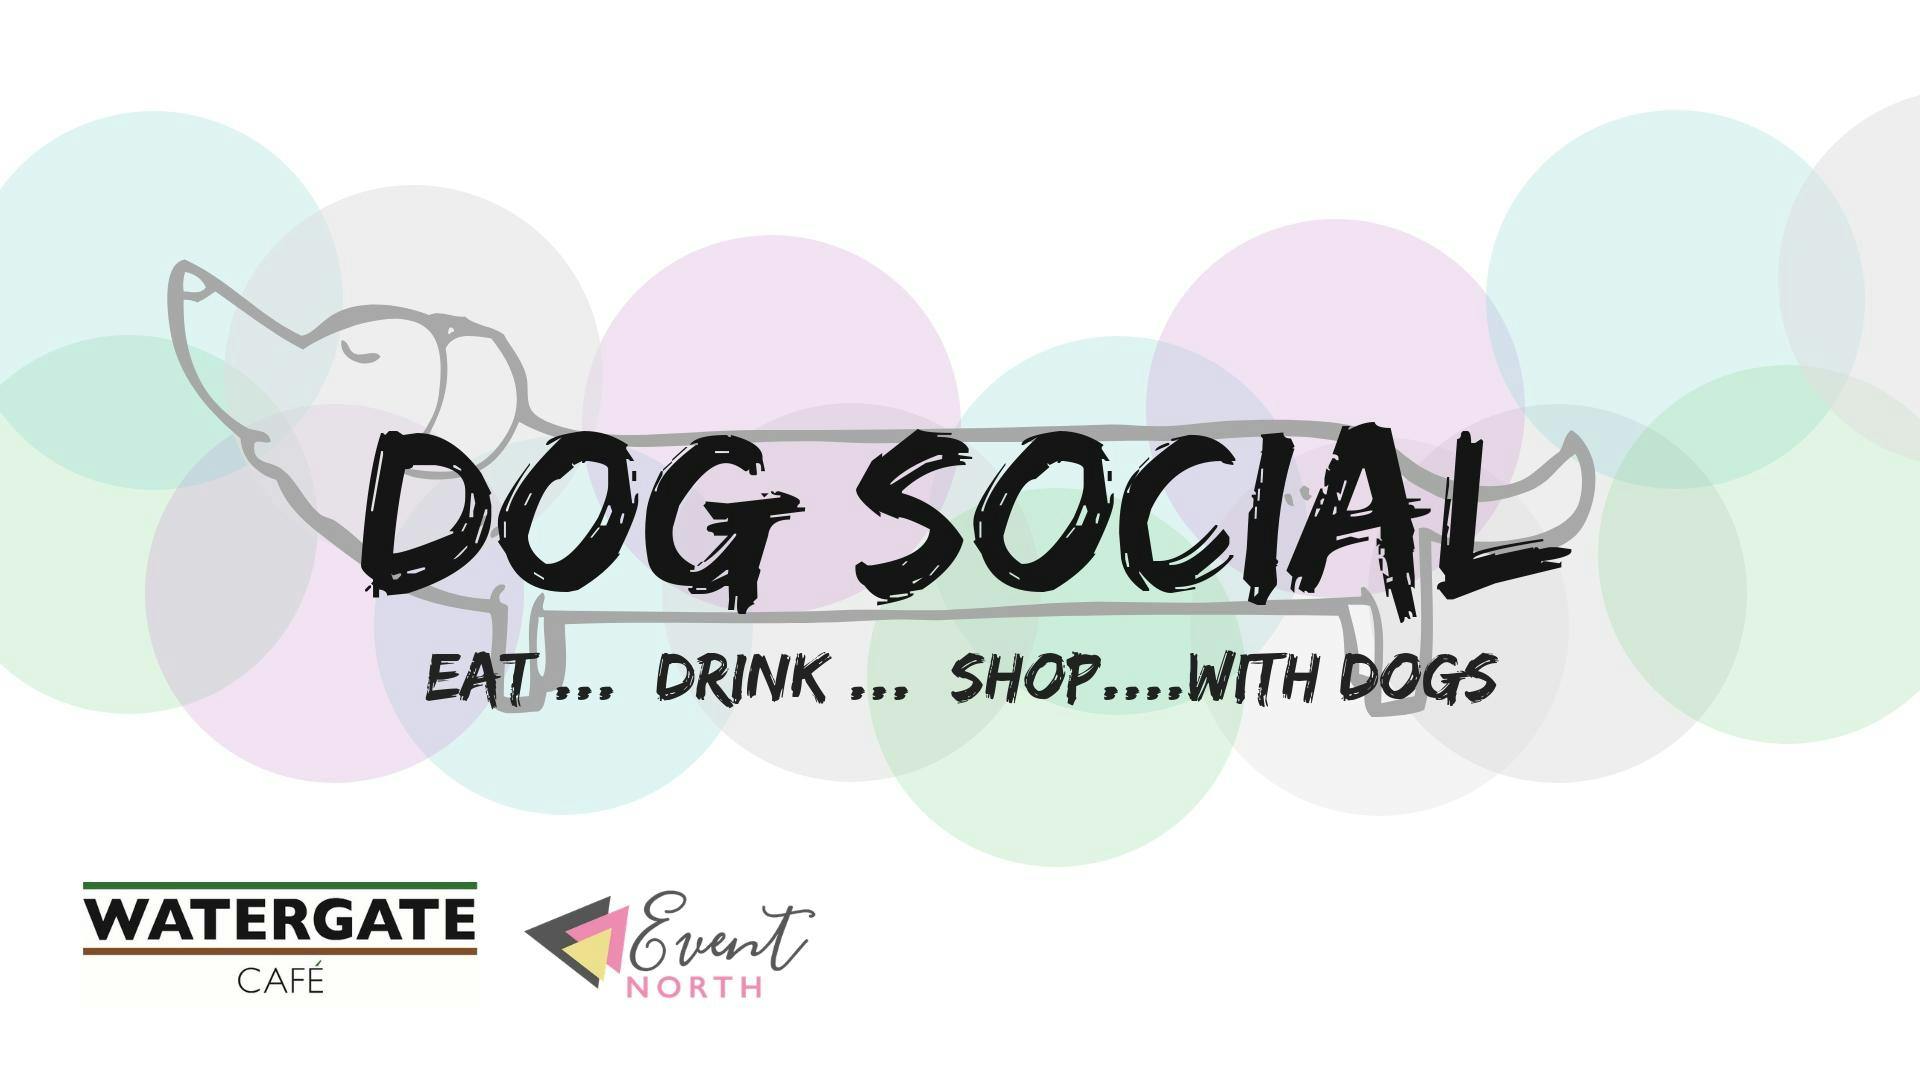 Watergate Cafe Dog Social